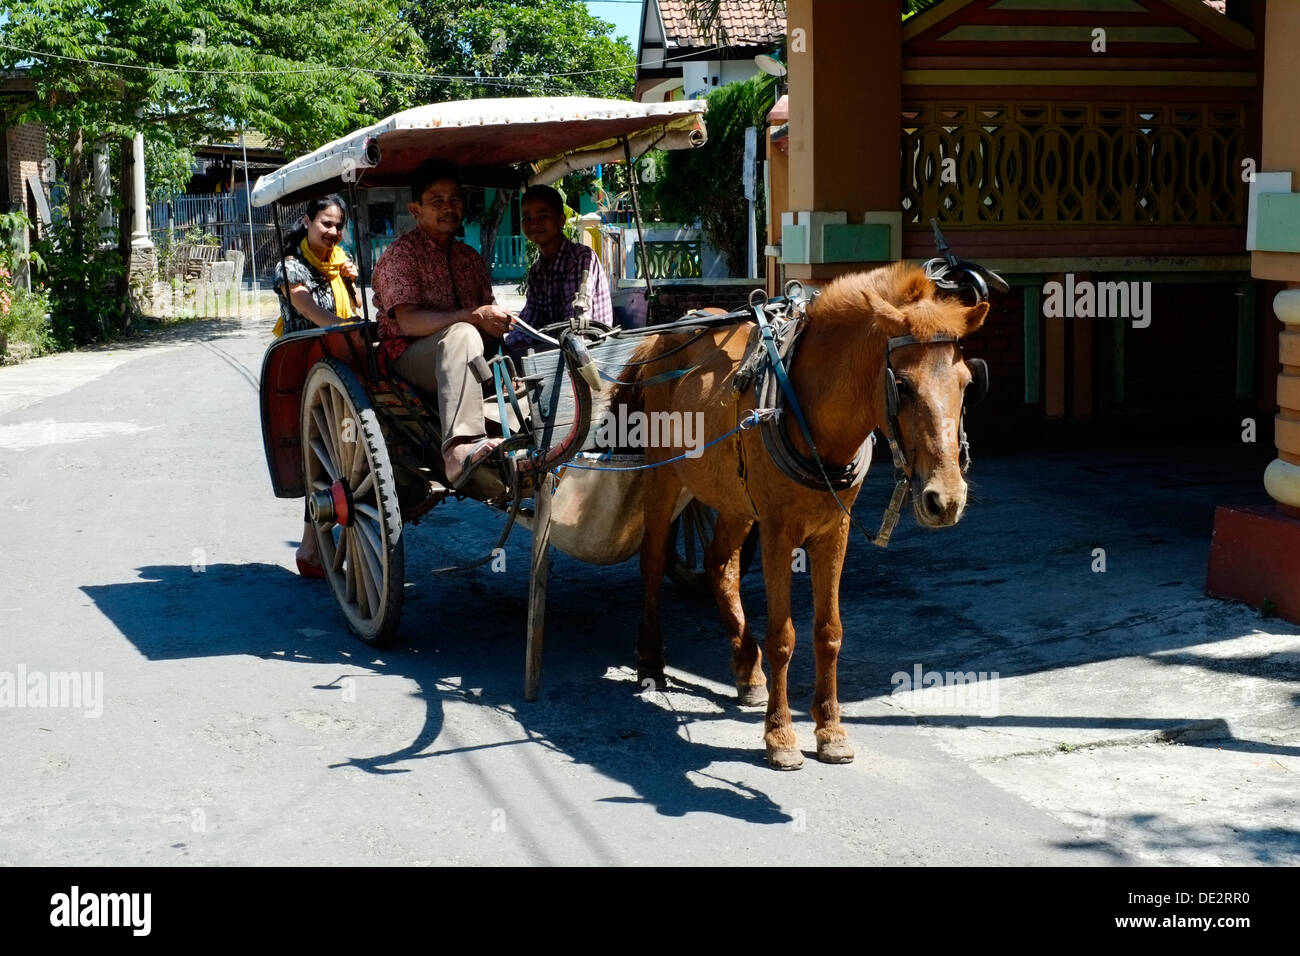 family in a horse and cart dokar a traditional inexpensive means of transport in indonesia Stock Photo